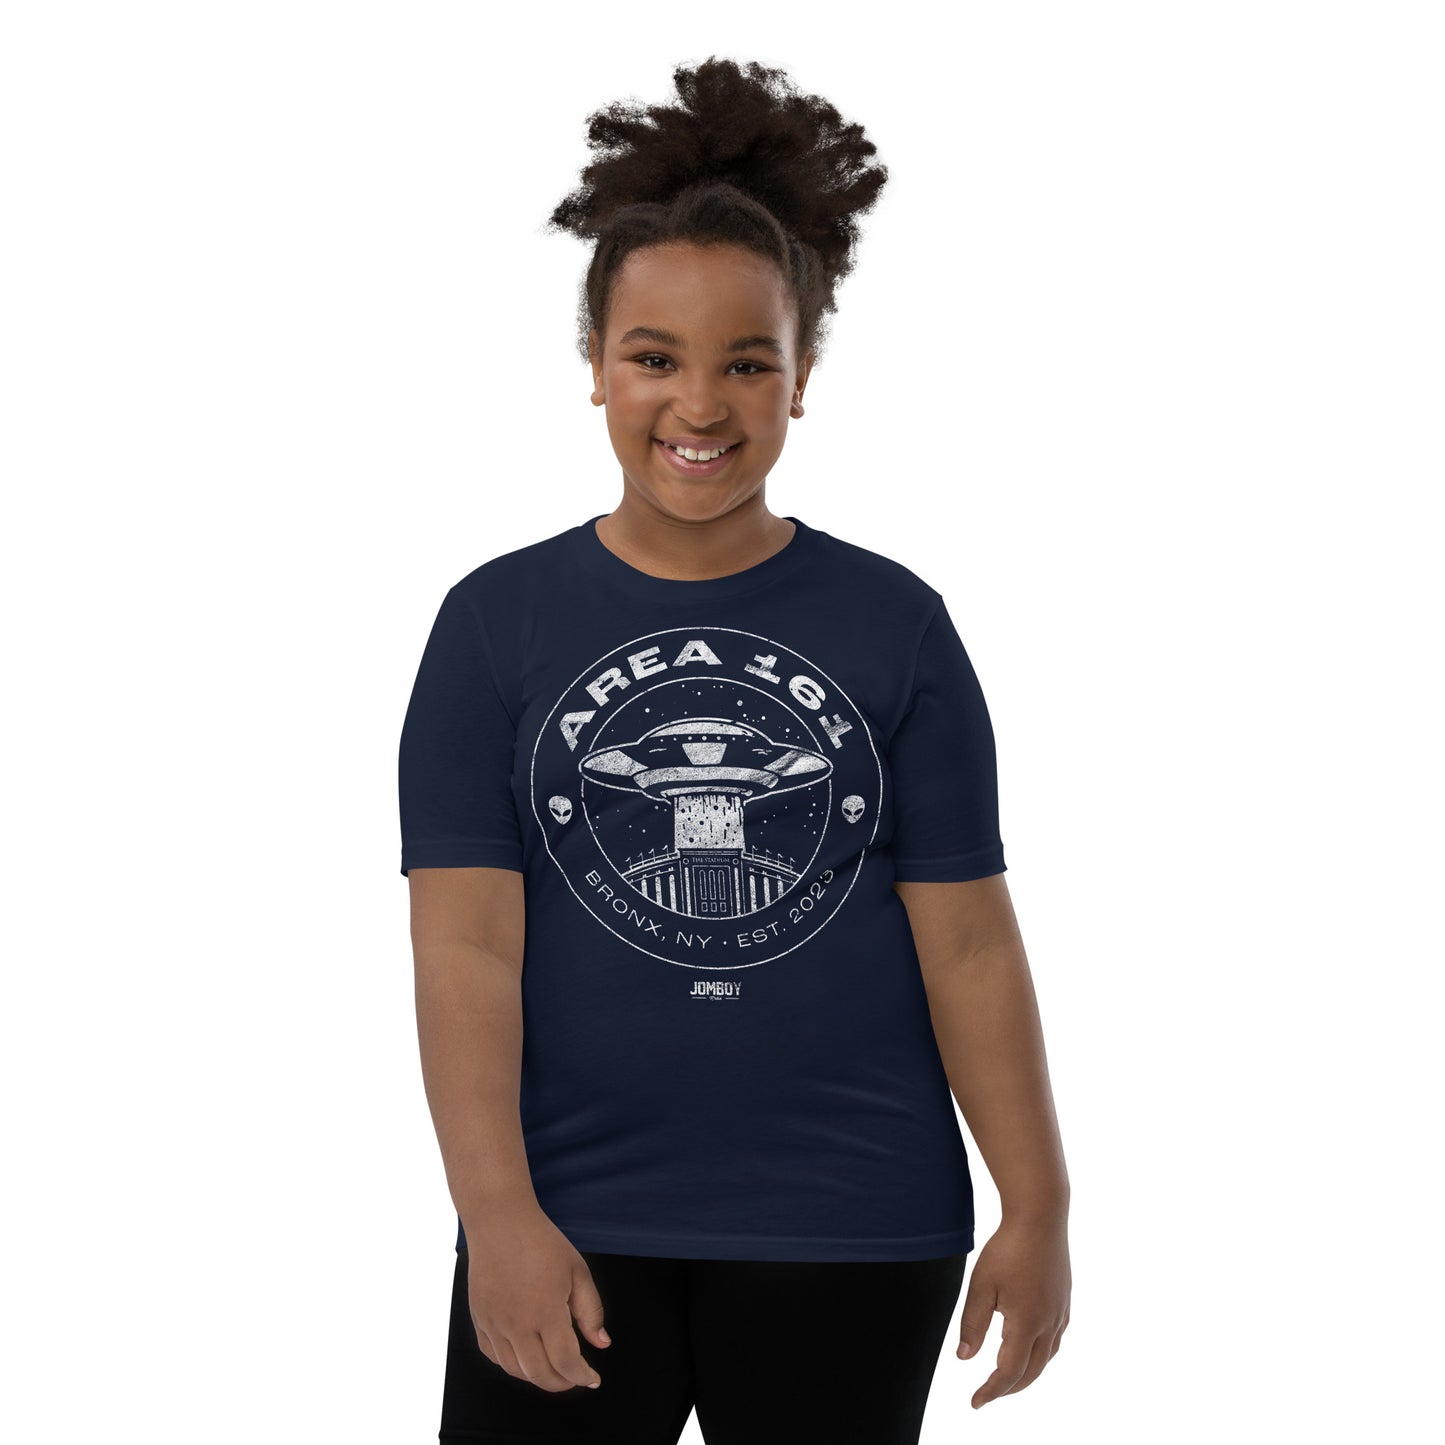 The Short Porch, Area 161 | Youth T-Shirt